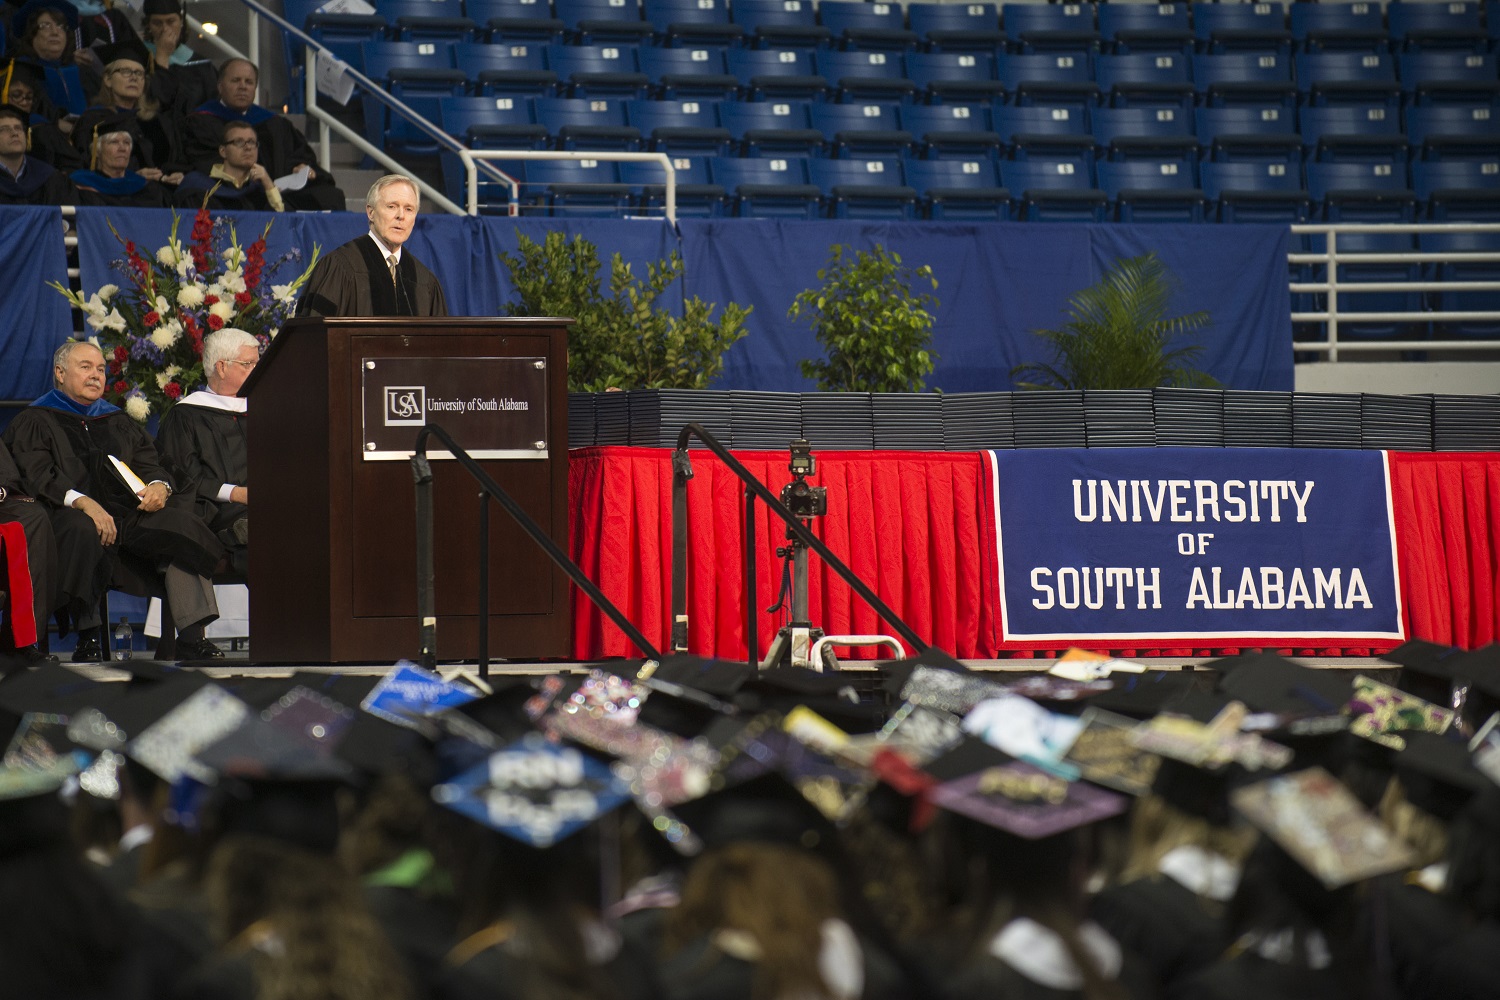 MOBILE, Ala. (May 9, 2015) Secretary of the Navy (SECNAV) Ray Mabus delivers remarks during the afternoon graduation ceremony for the University of South Alabama class of 2015. During his remarks, Mabus challenged the graduates to seek out ways to serve their country. U.S. Navy photo by Mass Communication Specialist 2nd Class Armando Gonzales.